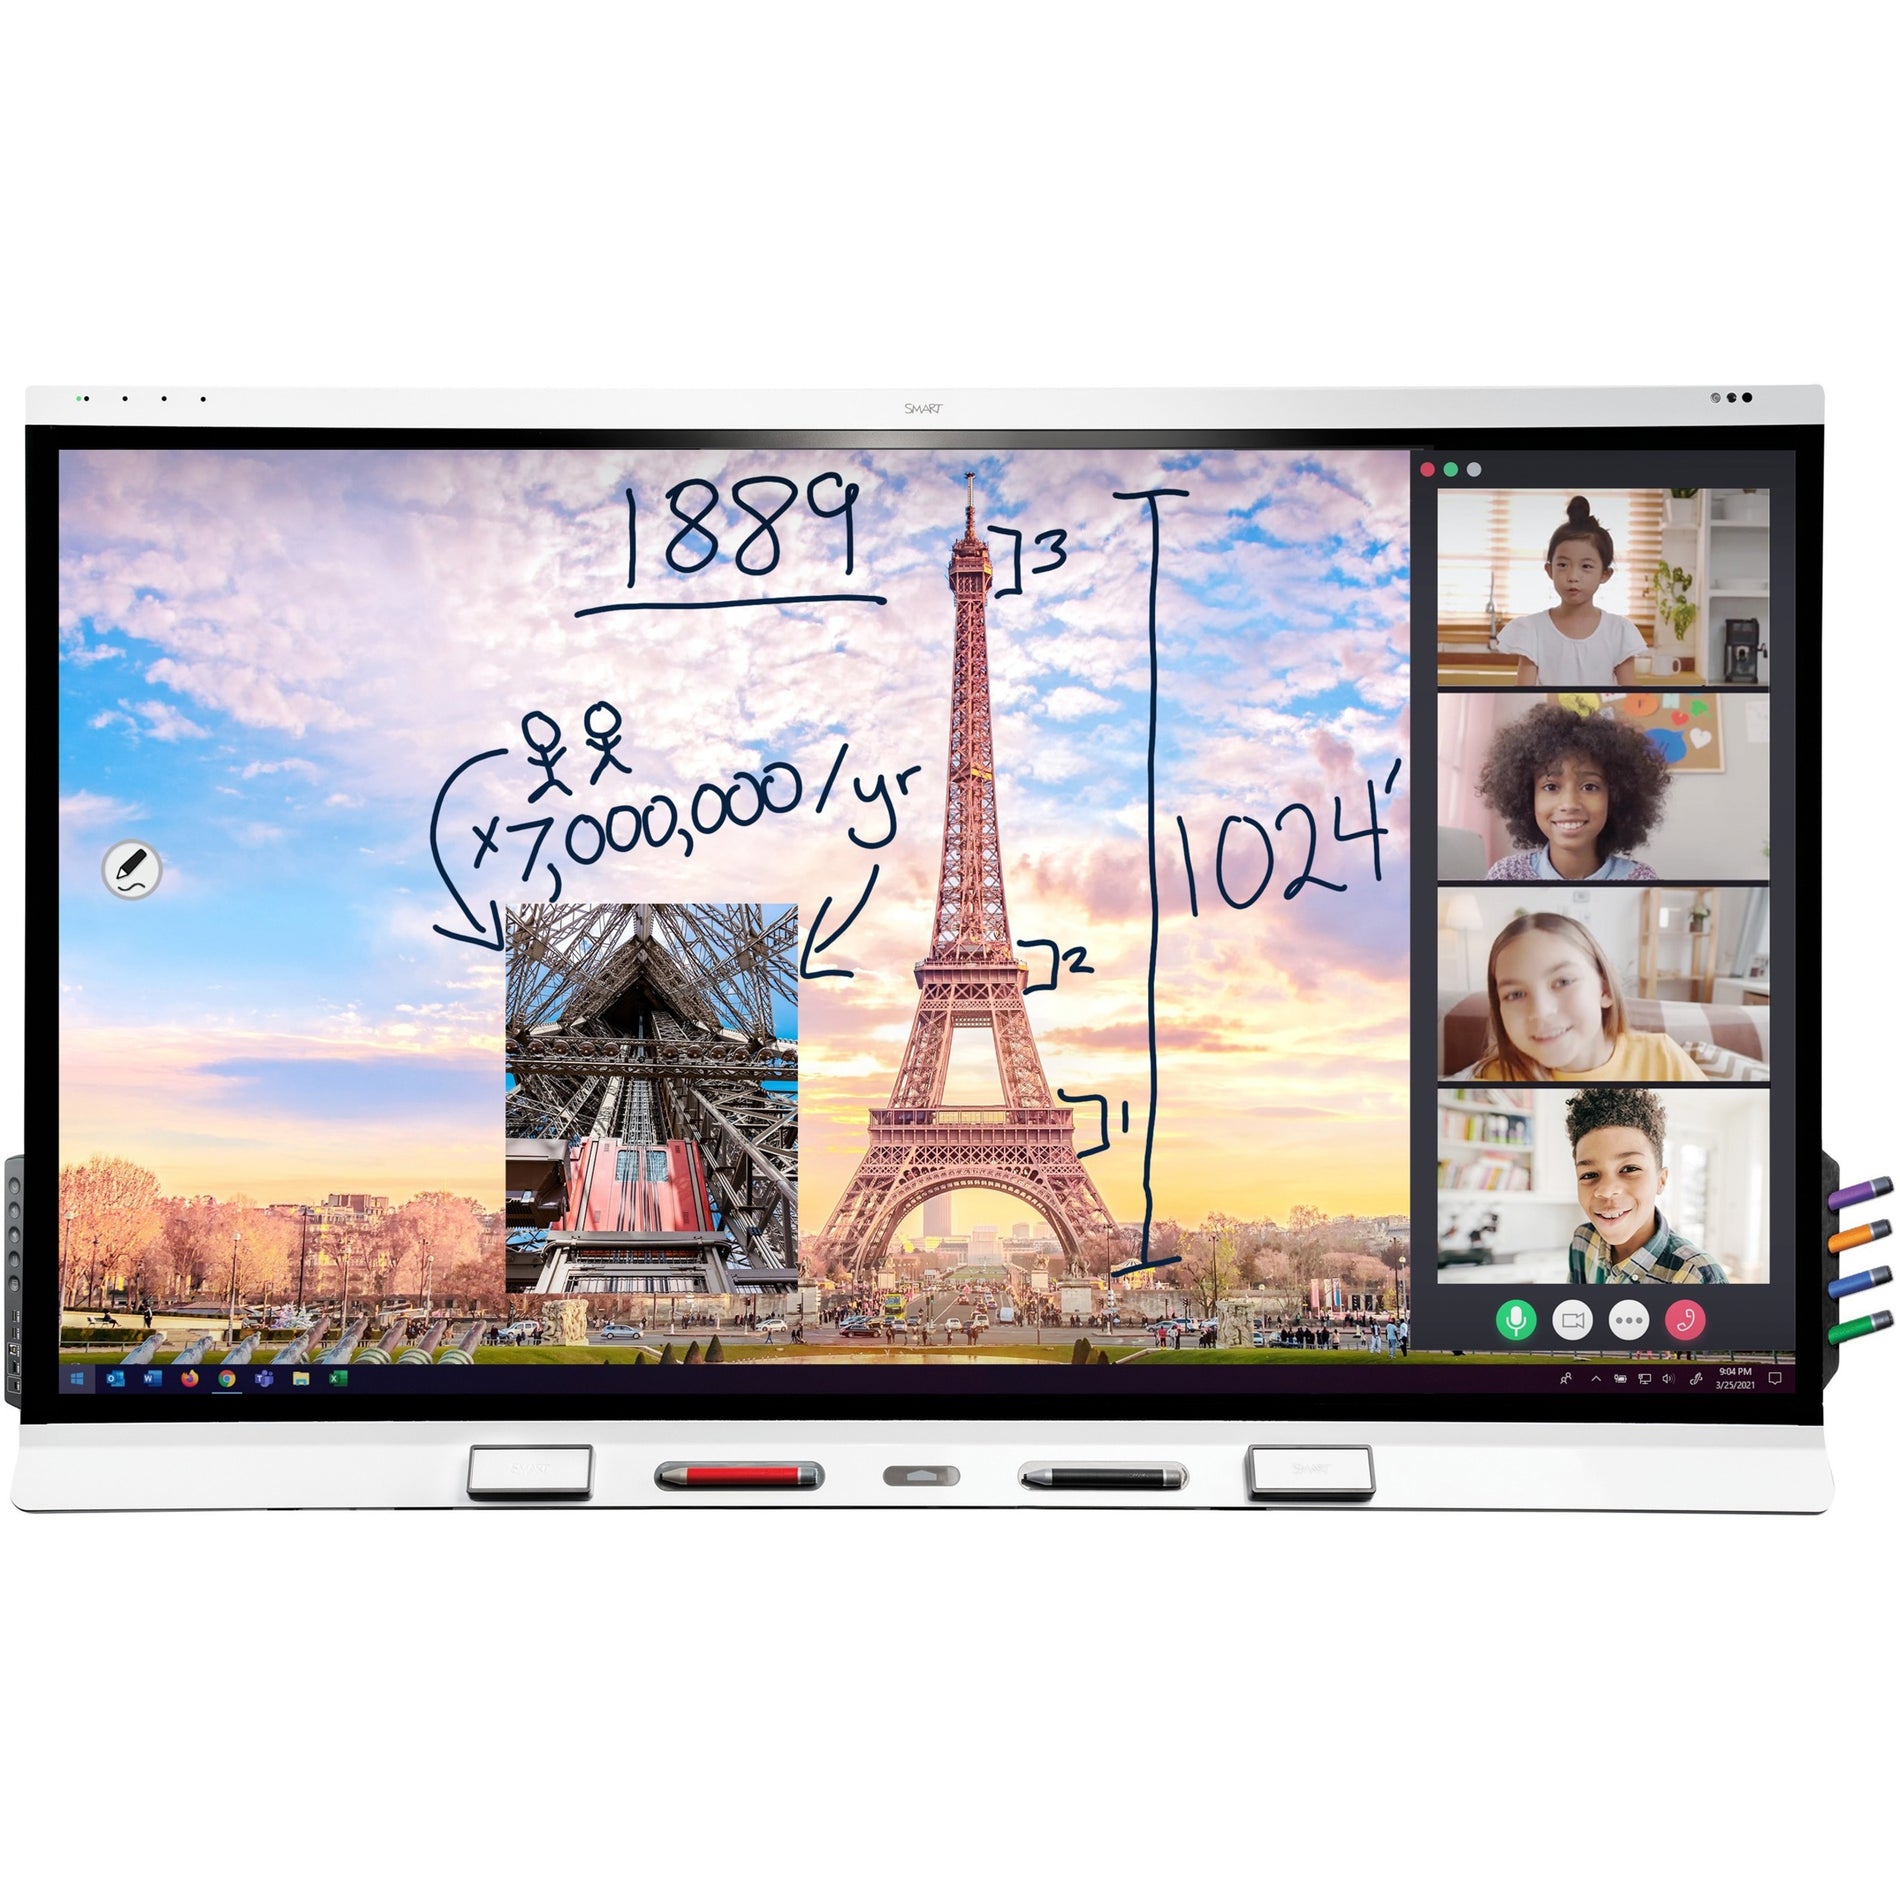 SMART Board SBID-6275S-V3 6075S-V3 Interactive Display with iQ, 75" 4K UHD LCD Touchscreen, Android 9.0 Pie, 6GB RAM, 40W Speakers [Discontinued]